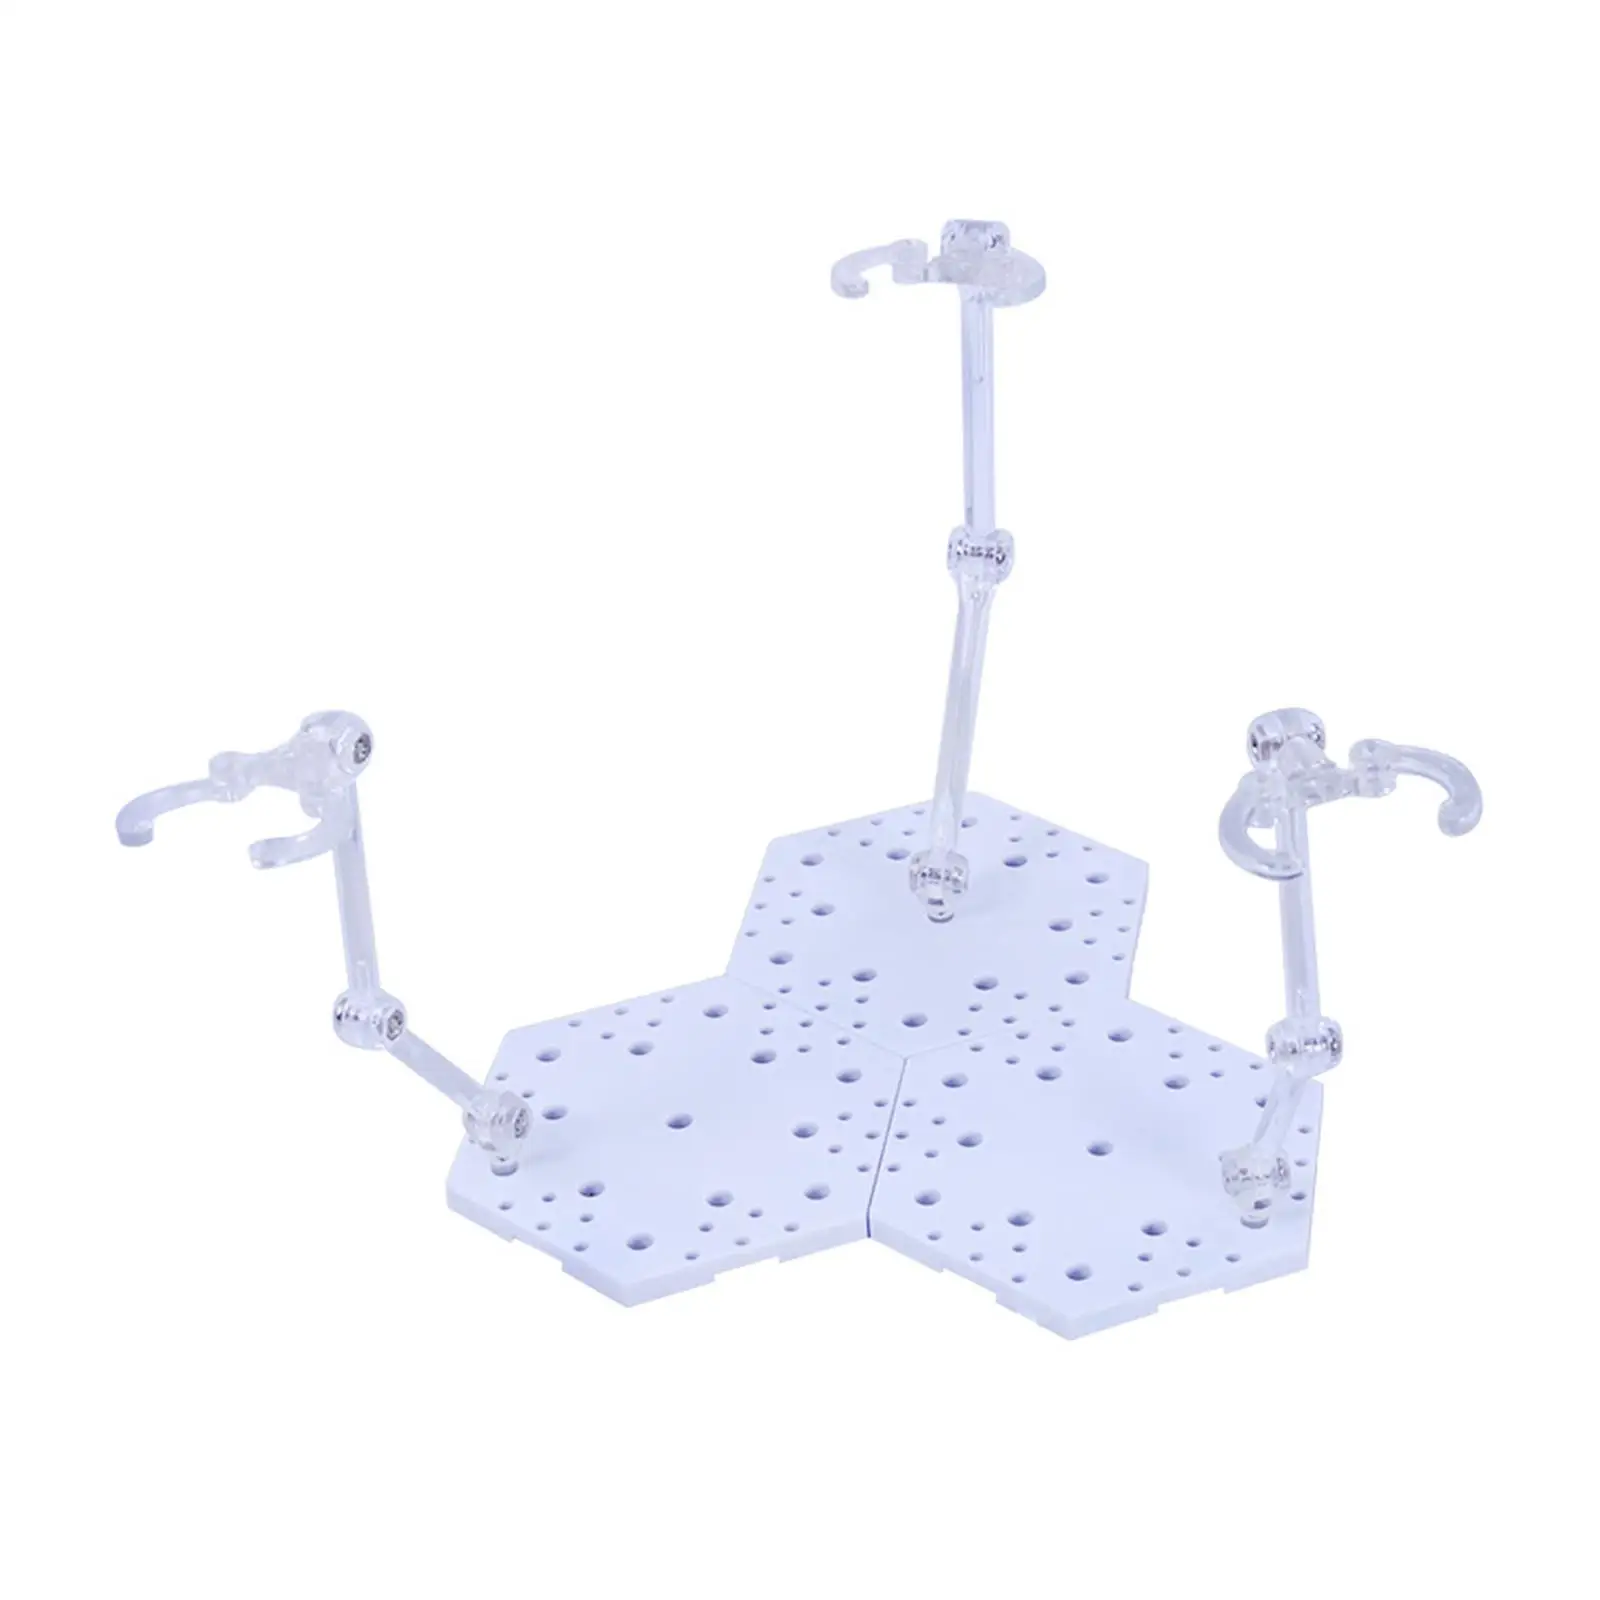 Sturdy Action Figure Base Support Holder Stand Rack for Doll Model Toys Accessories